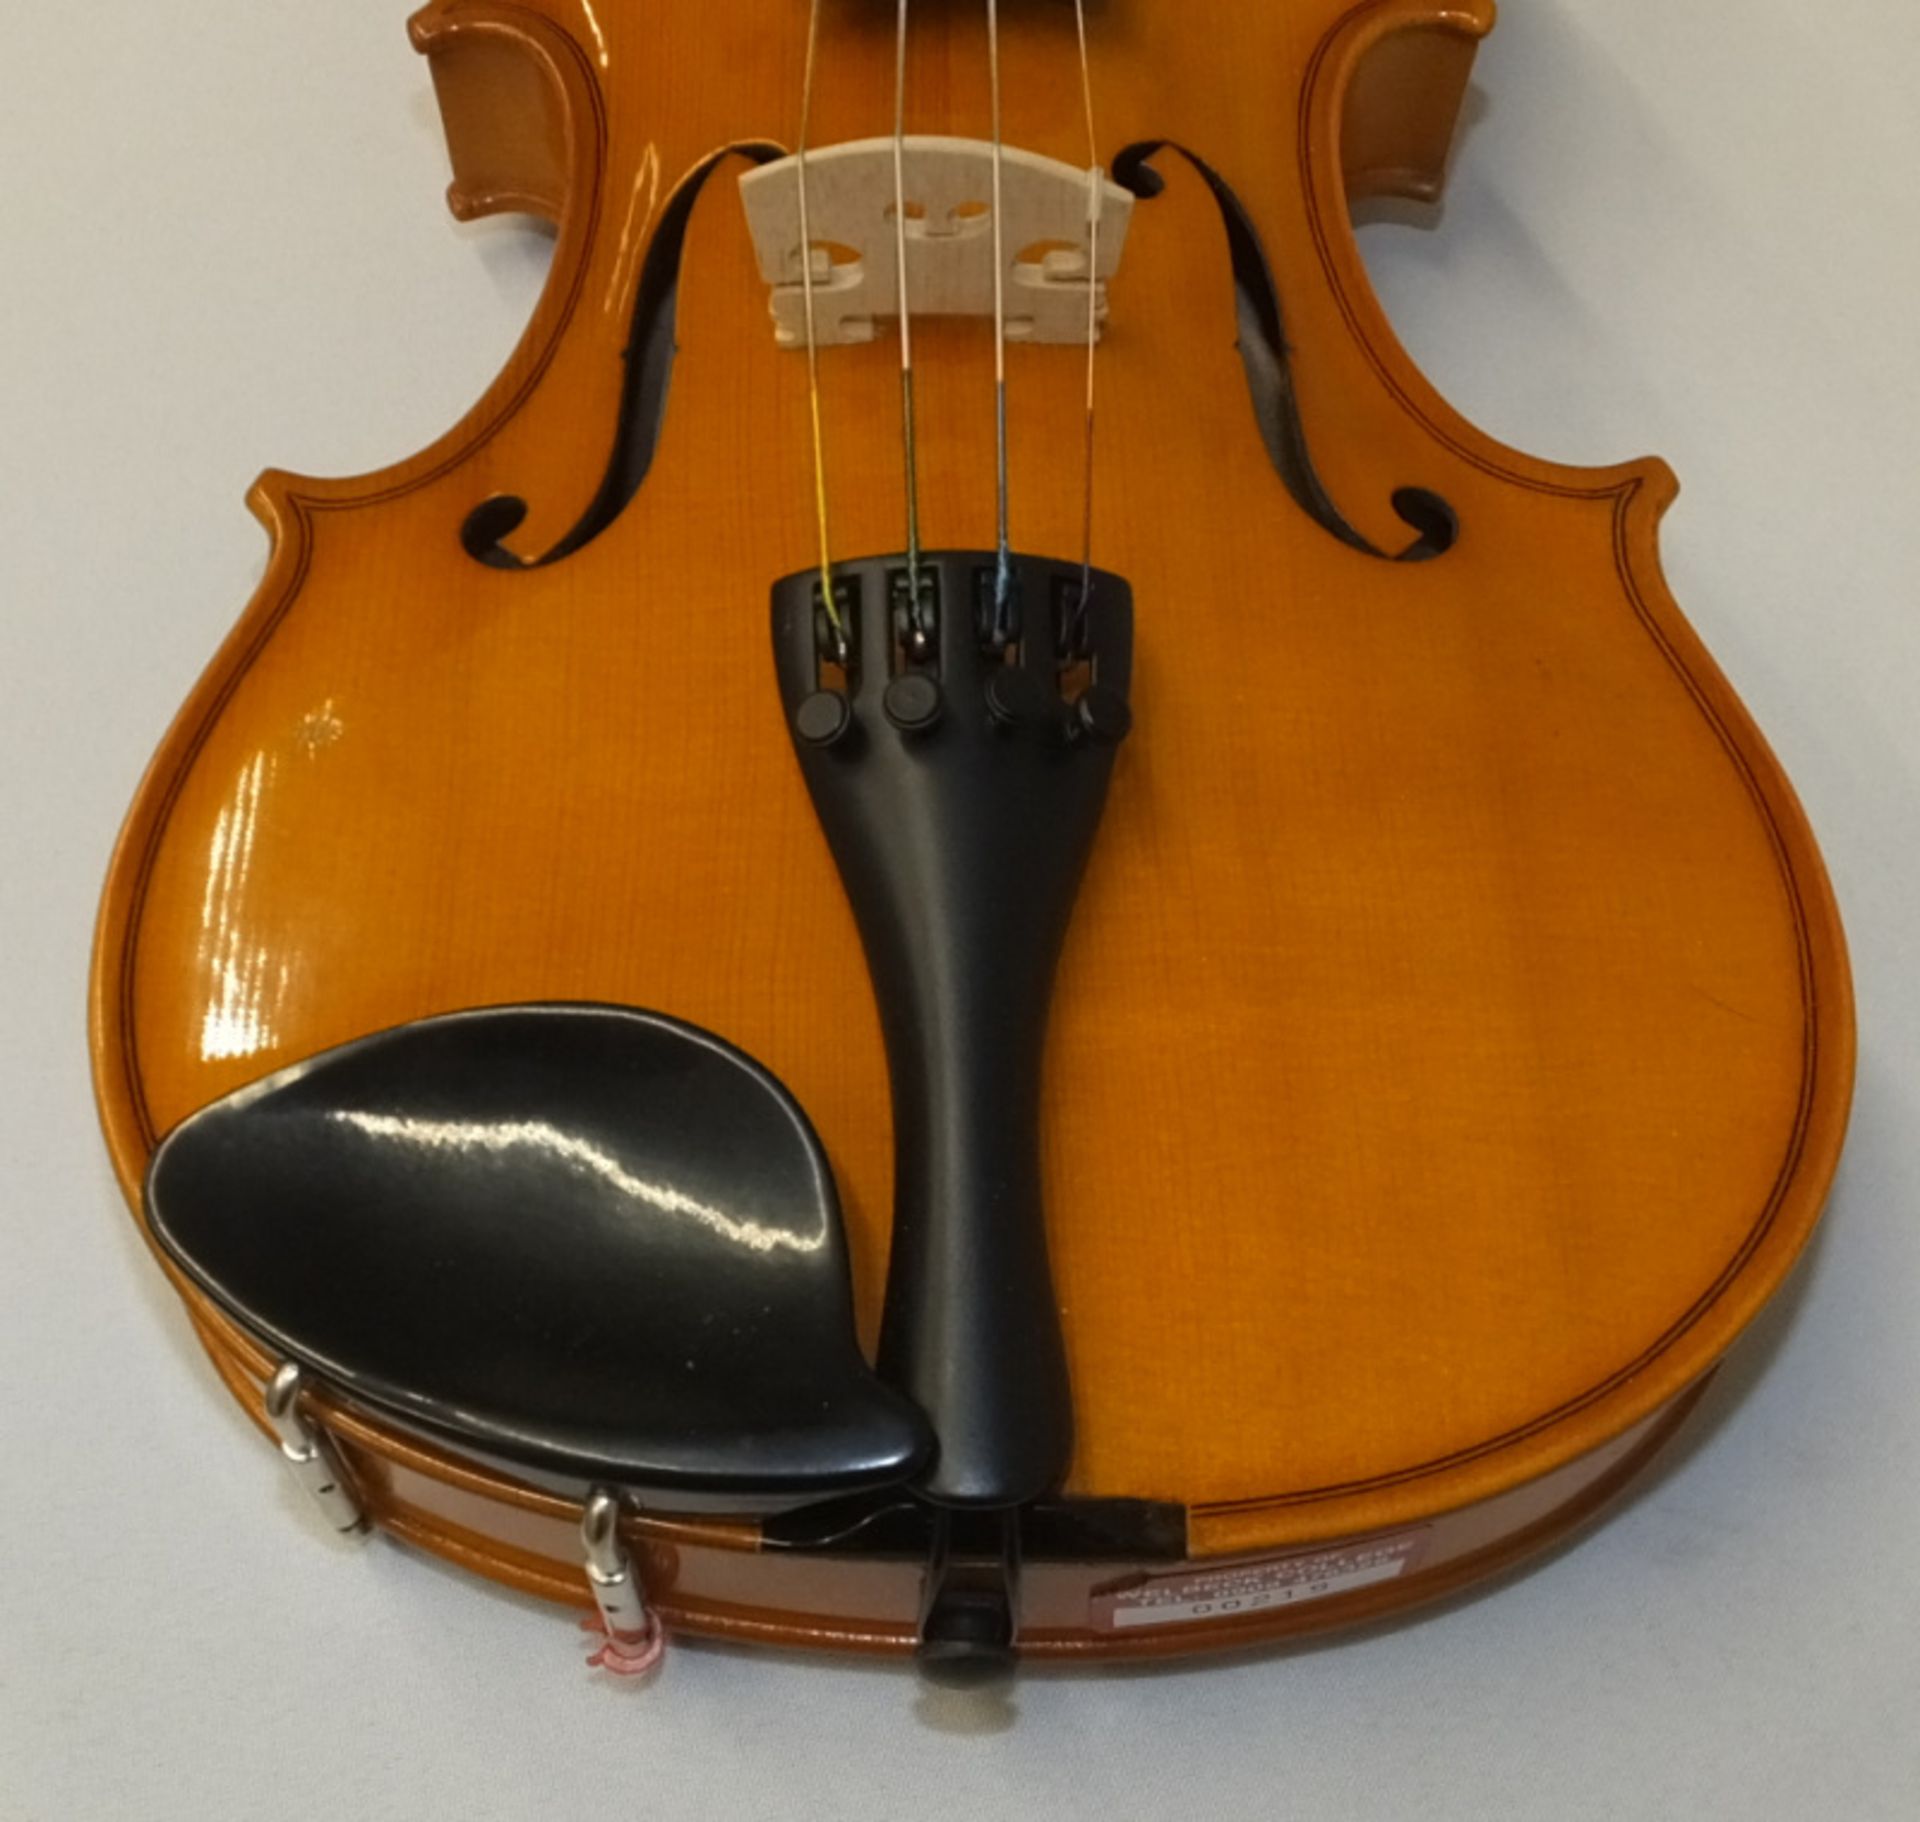 Andreas Zeller Violin & Case - Please check photos carefully for damaged or missing components - Image 4 of 18